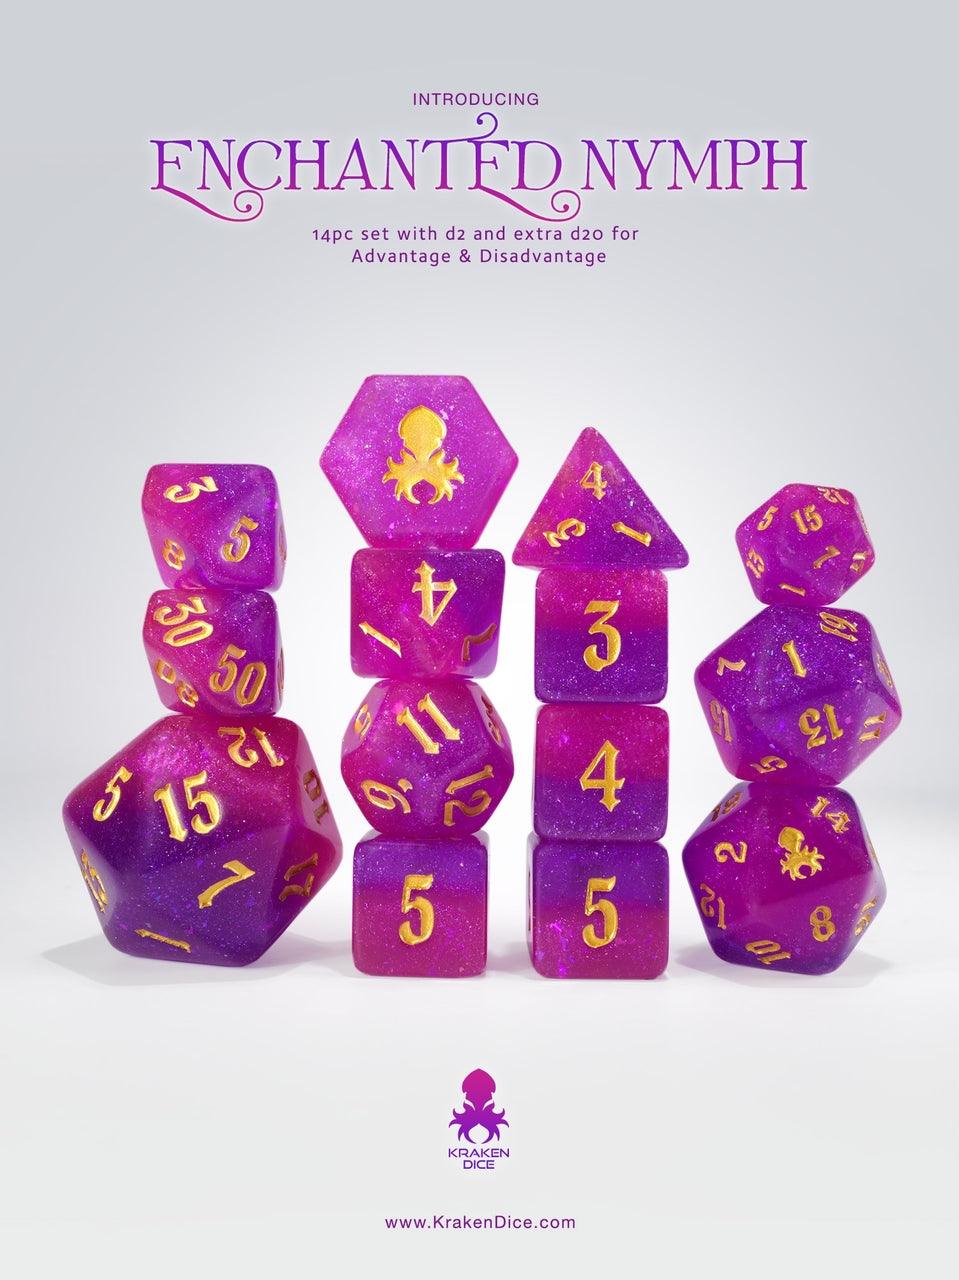 Enchanted Nymph 14 pc - Limited Run - Gold Ink Dice Set - Bards & Cards